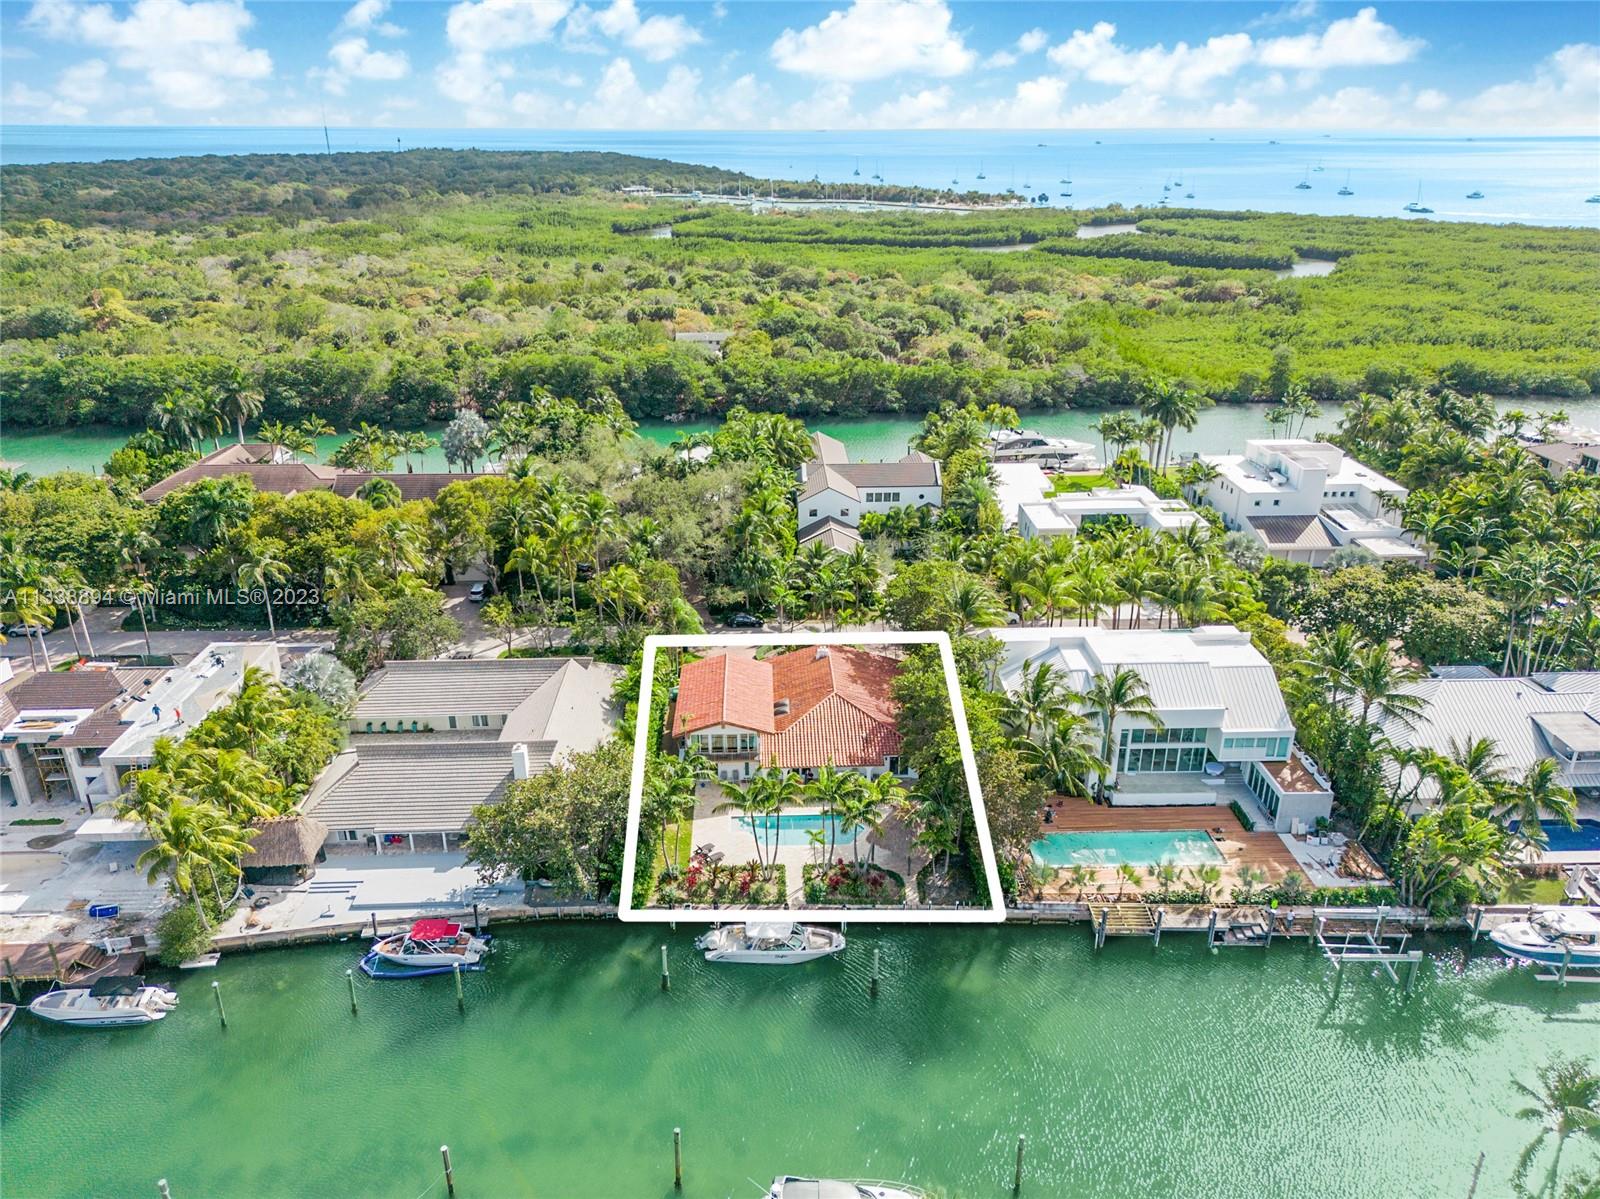 Key Biscayne ocean access waterfront home with no bridges to Bay. 88 feet on the water.  Accommodates large yachts (turning basin).  This lovingly maintained home on a no-traffic street is in excellent condition.  This property is an excellent value surrounded by homes in the $15-$20 million plus range. Excellent home for entertaining with pool, generous patio area and gazebo by the water!  Ultra secure location at the end of Key Biscayne next to Bill Baggs Cape Florida State Park. Take your boat around the corner for lunch or dinner and drinks at Boater's Grill and The Cleat.  Update and add value, build a modern masterpiece or move right in to this beautifully maintained ocean access home!